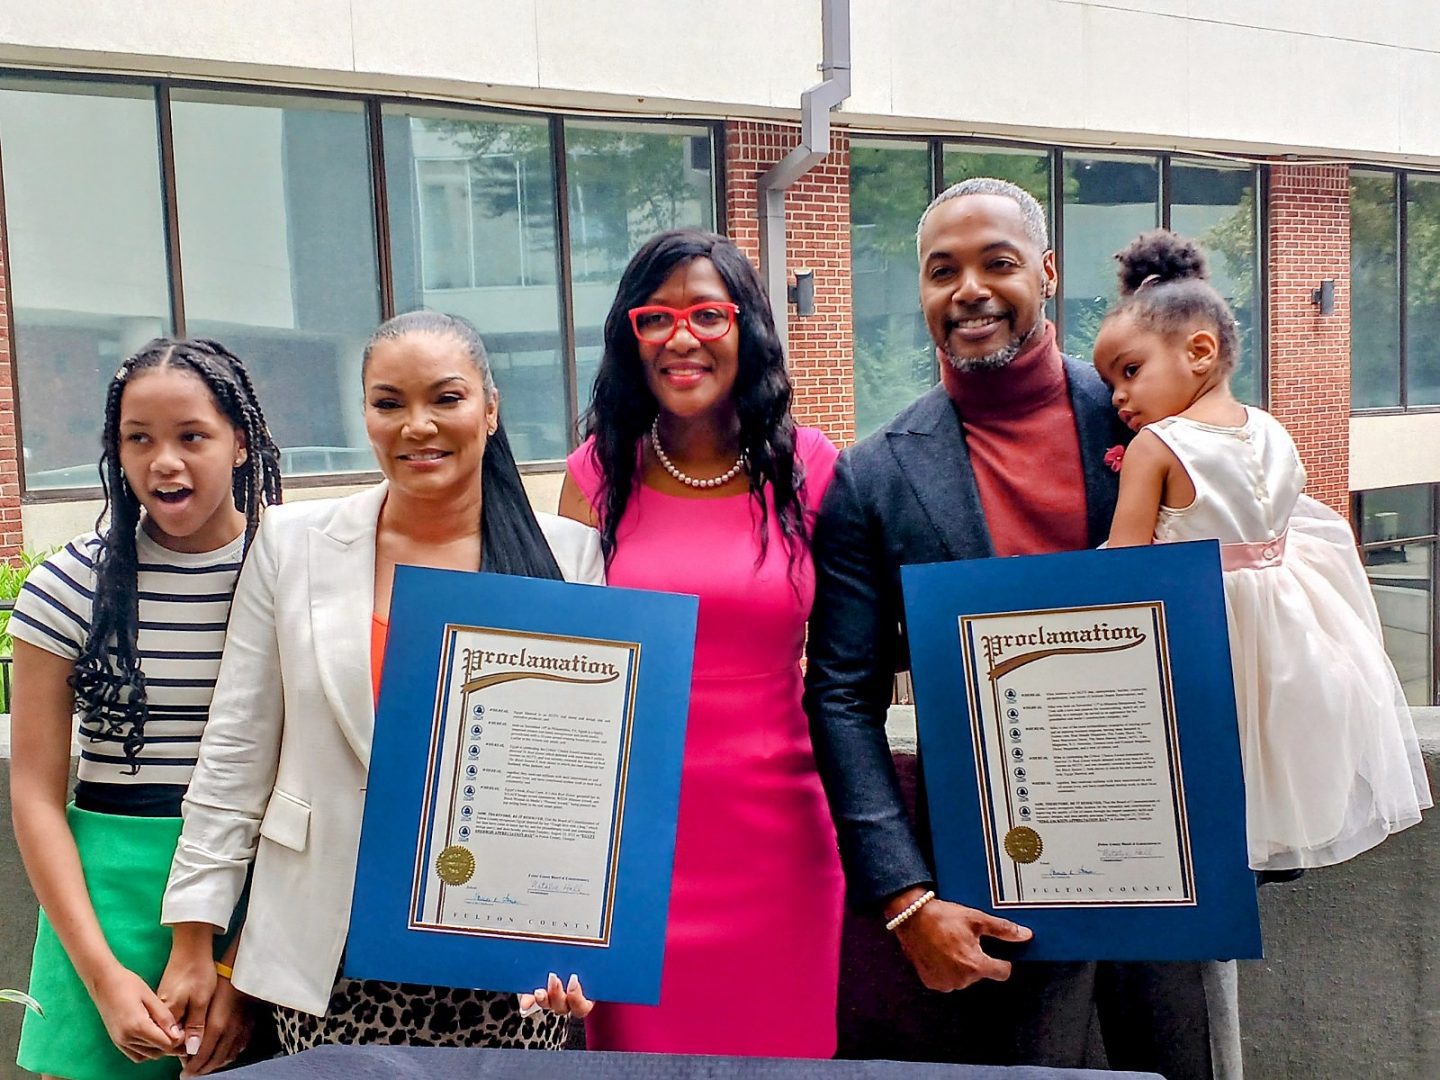 Egypt Sherrod and Mike Jackson honored by Fulton County government in Atlanta